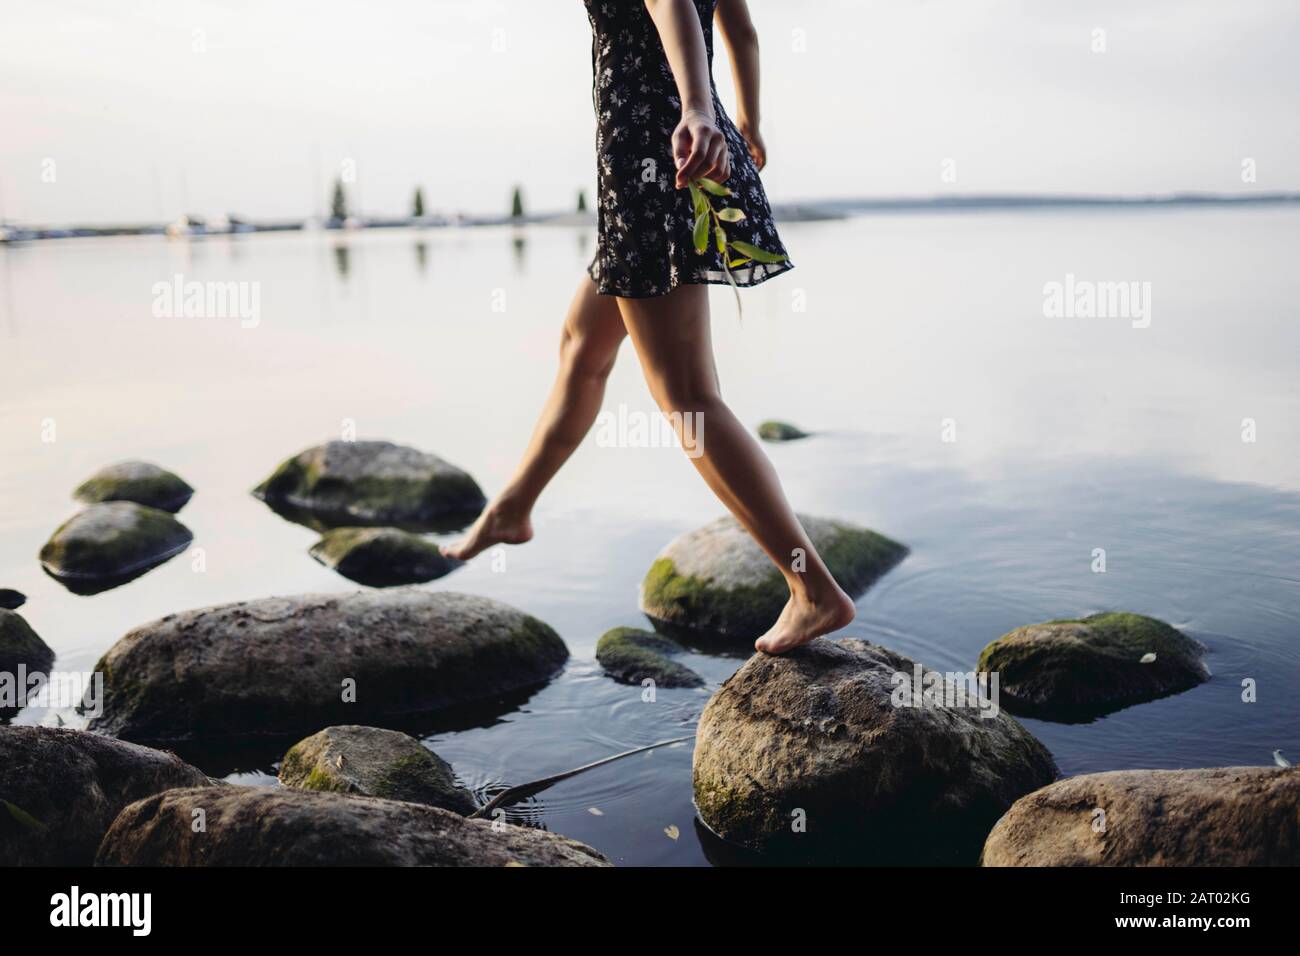 Barefoot woman stepping on rocks in sea Stock Photo